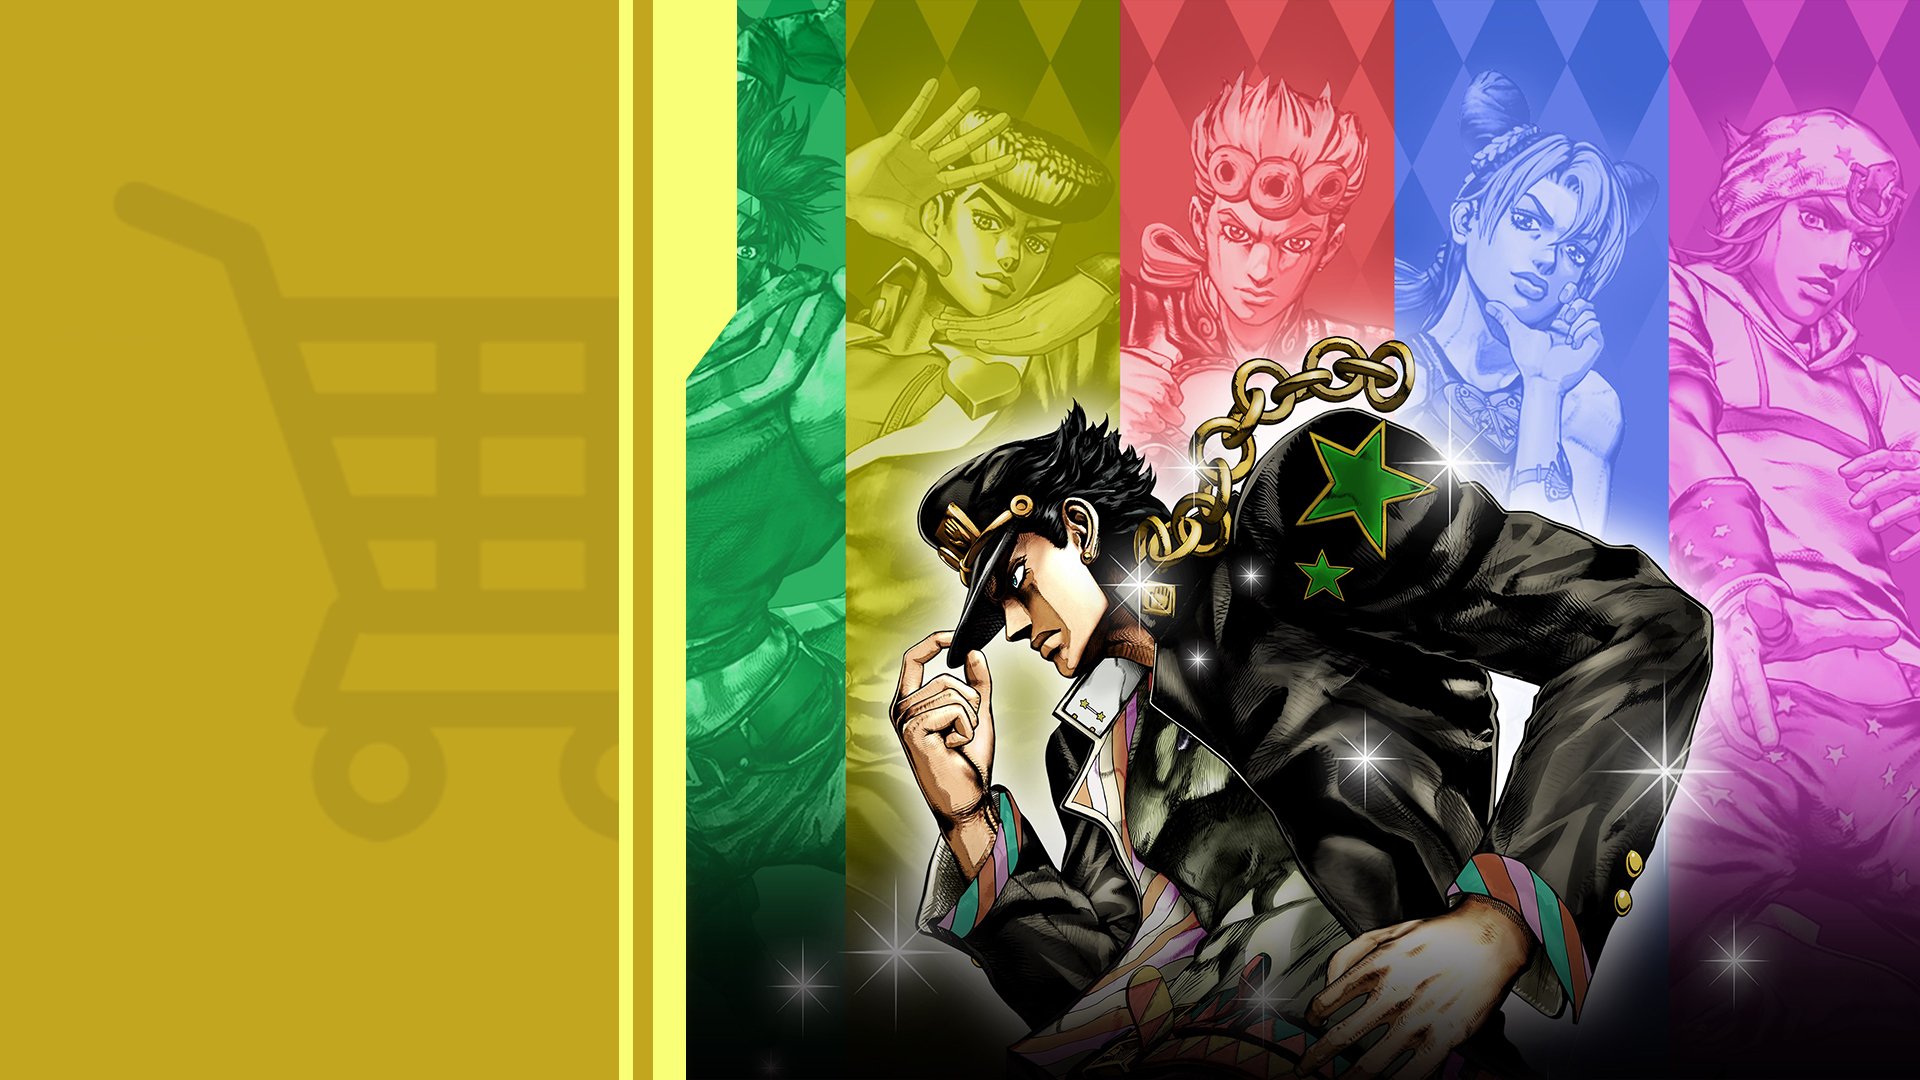 JoJo's Bizarre Adventure HD' coming to Xbox 360 and PlayStation 3